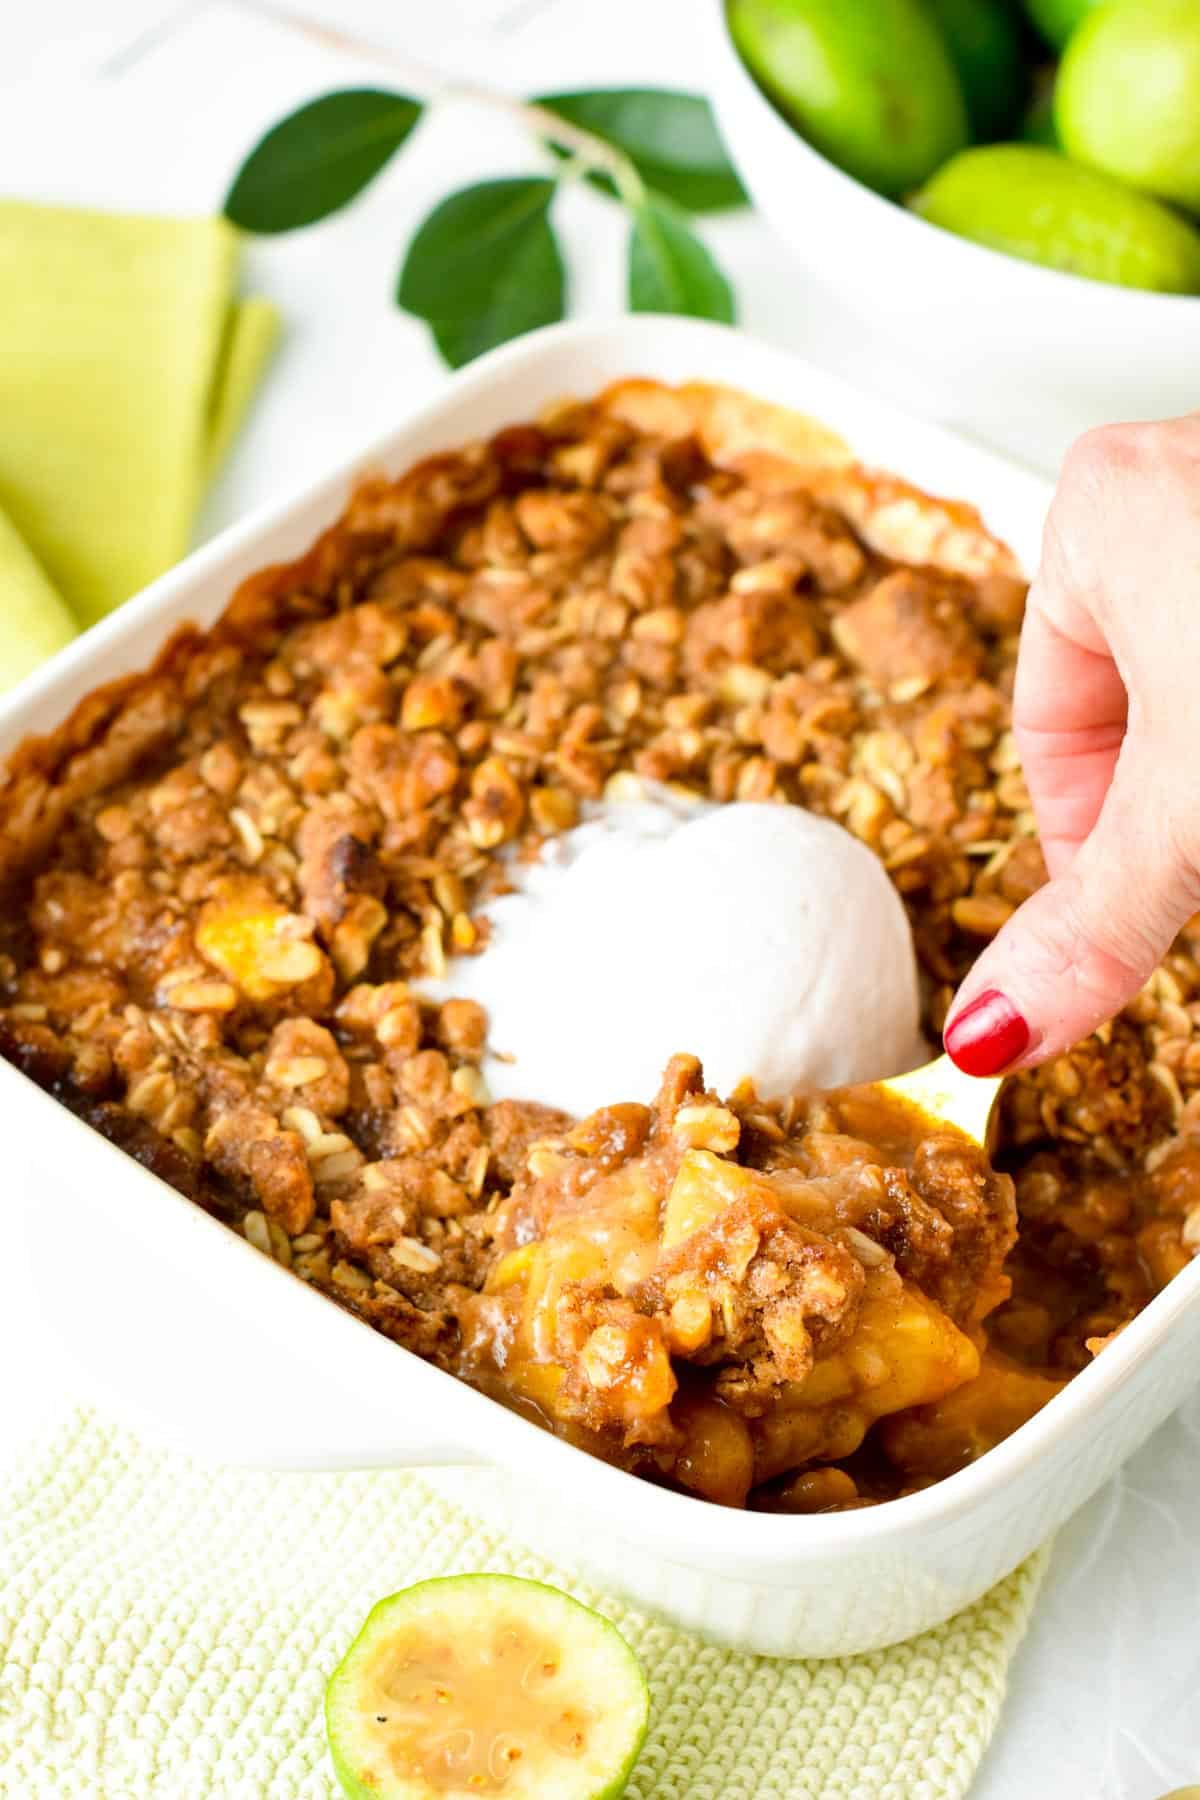 An easy Feijoa Crumble perfect to use all your Feijoa fruits this Autumn and serve as a delicious dessert to all the family.